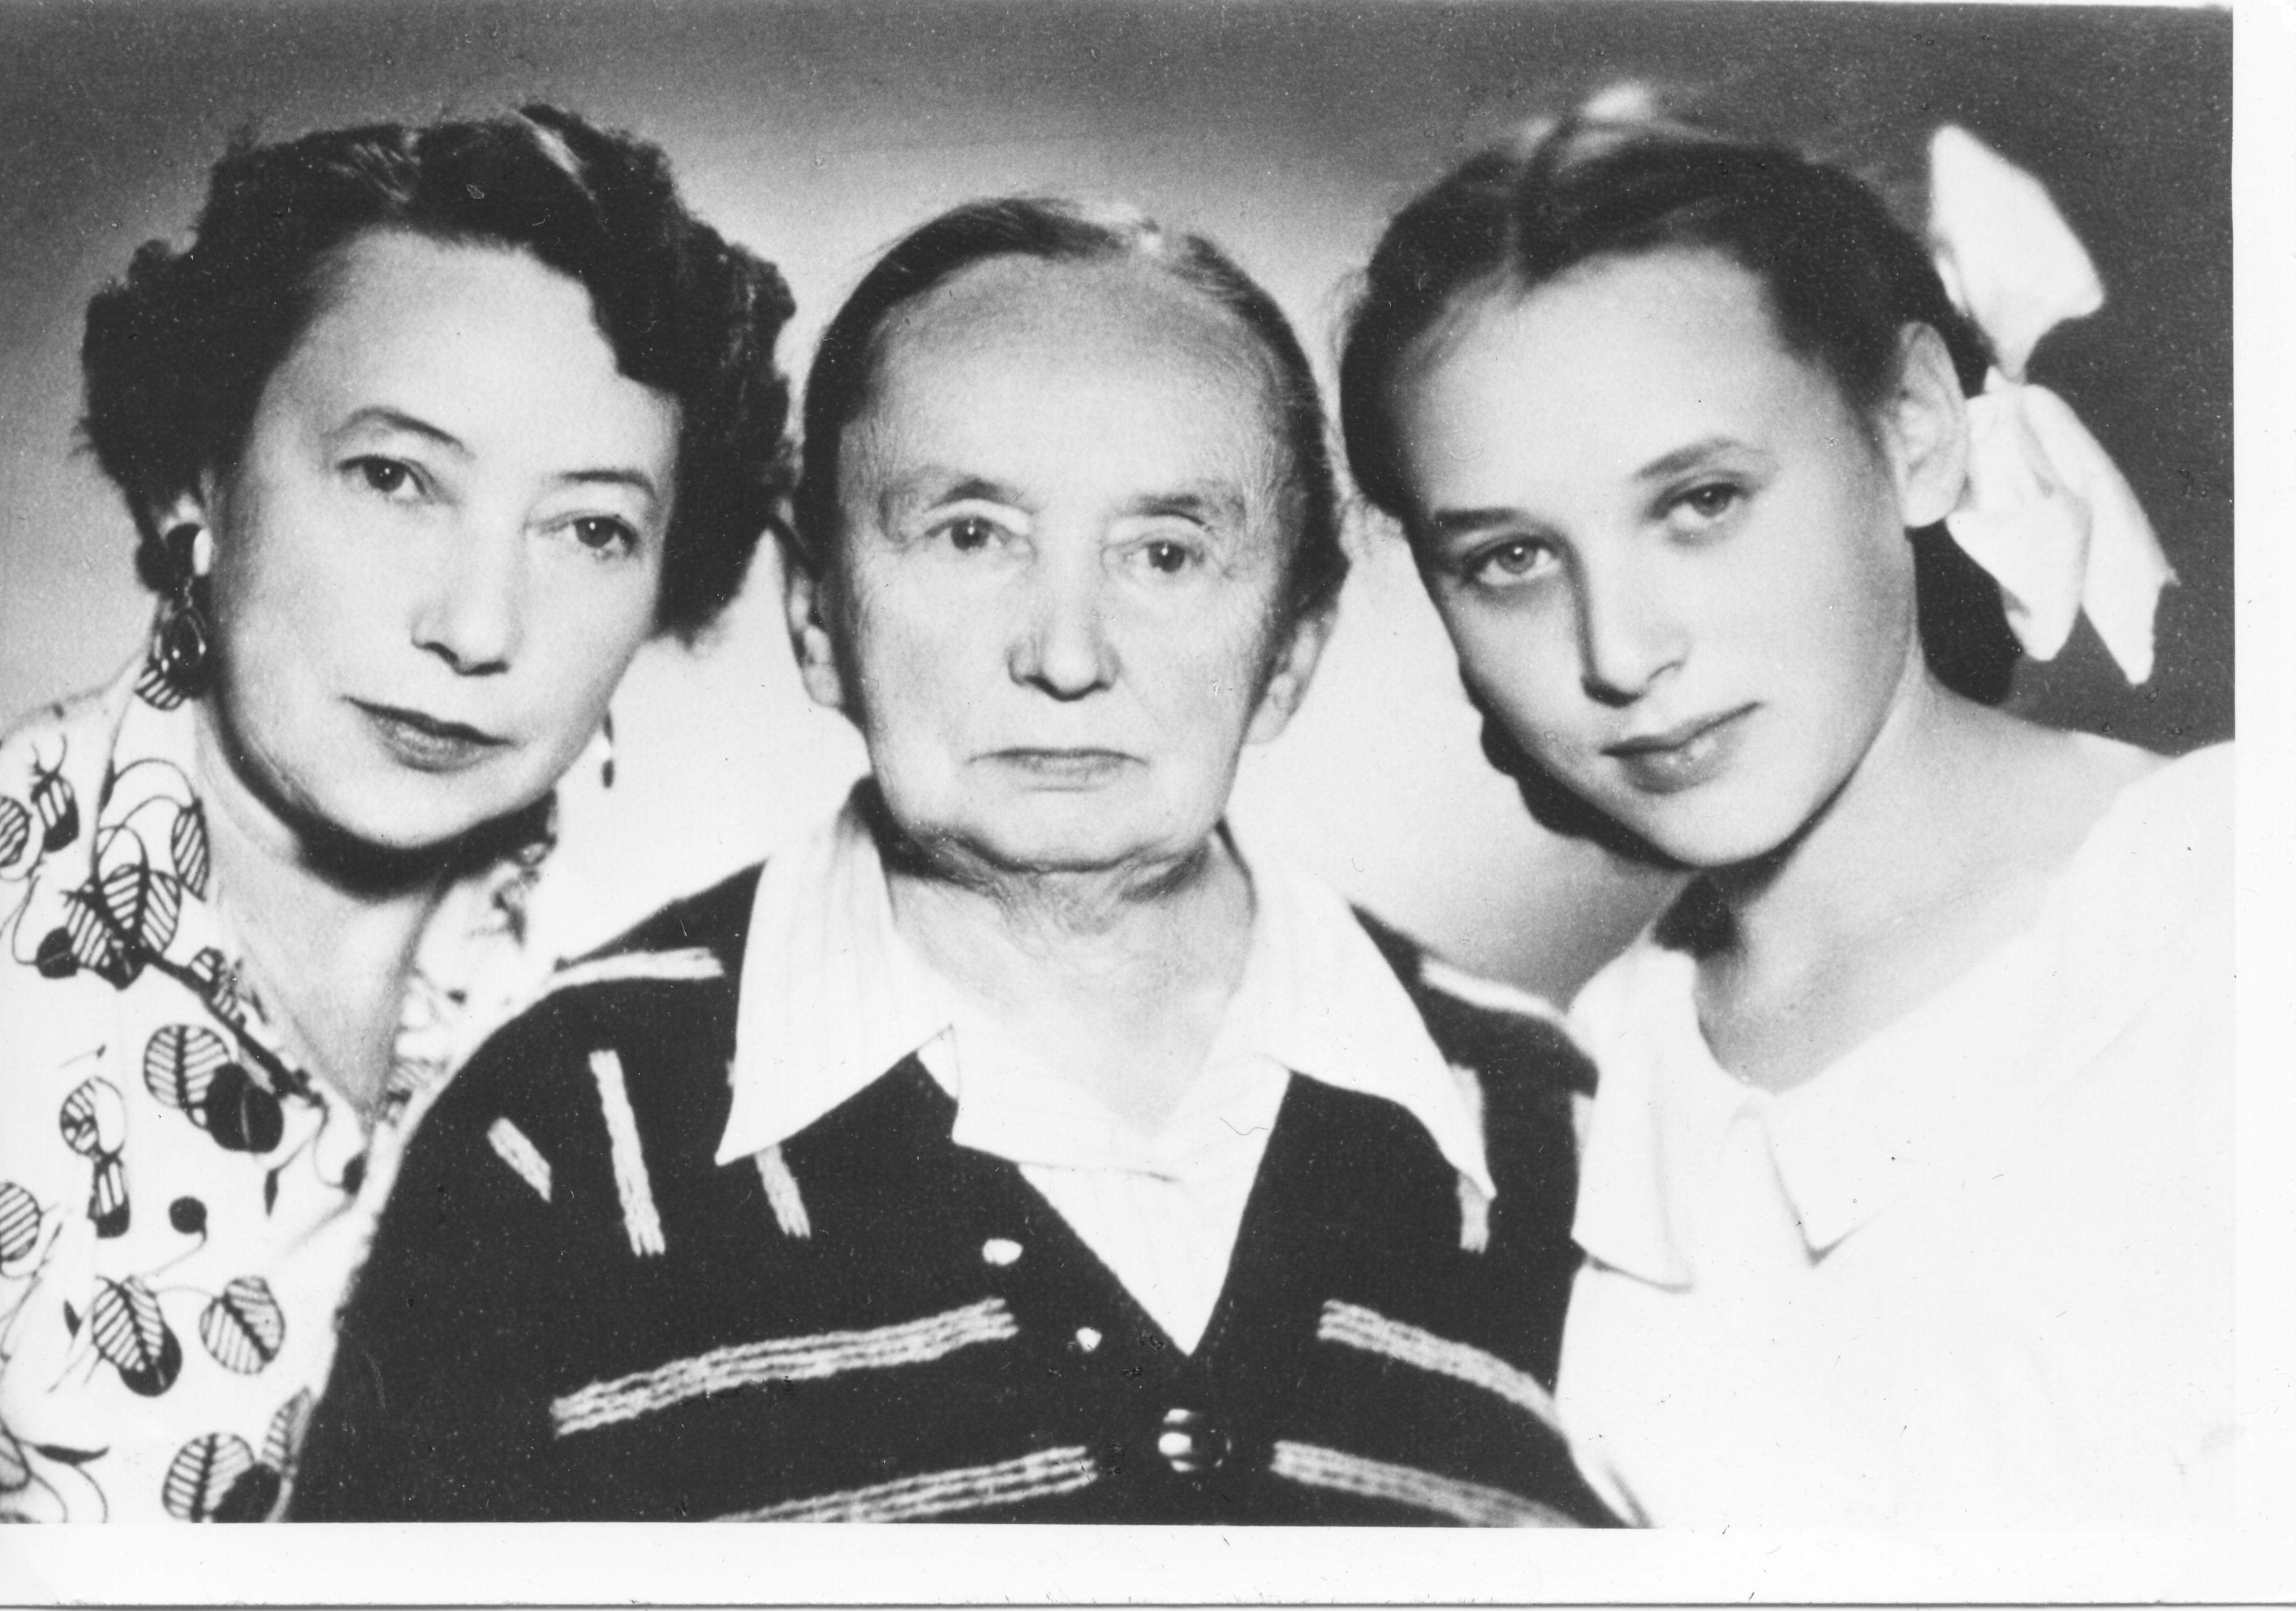 From left to right - rescued Polina Fruman, her mother Eta Gavronskaya and daughter Shlomit